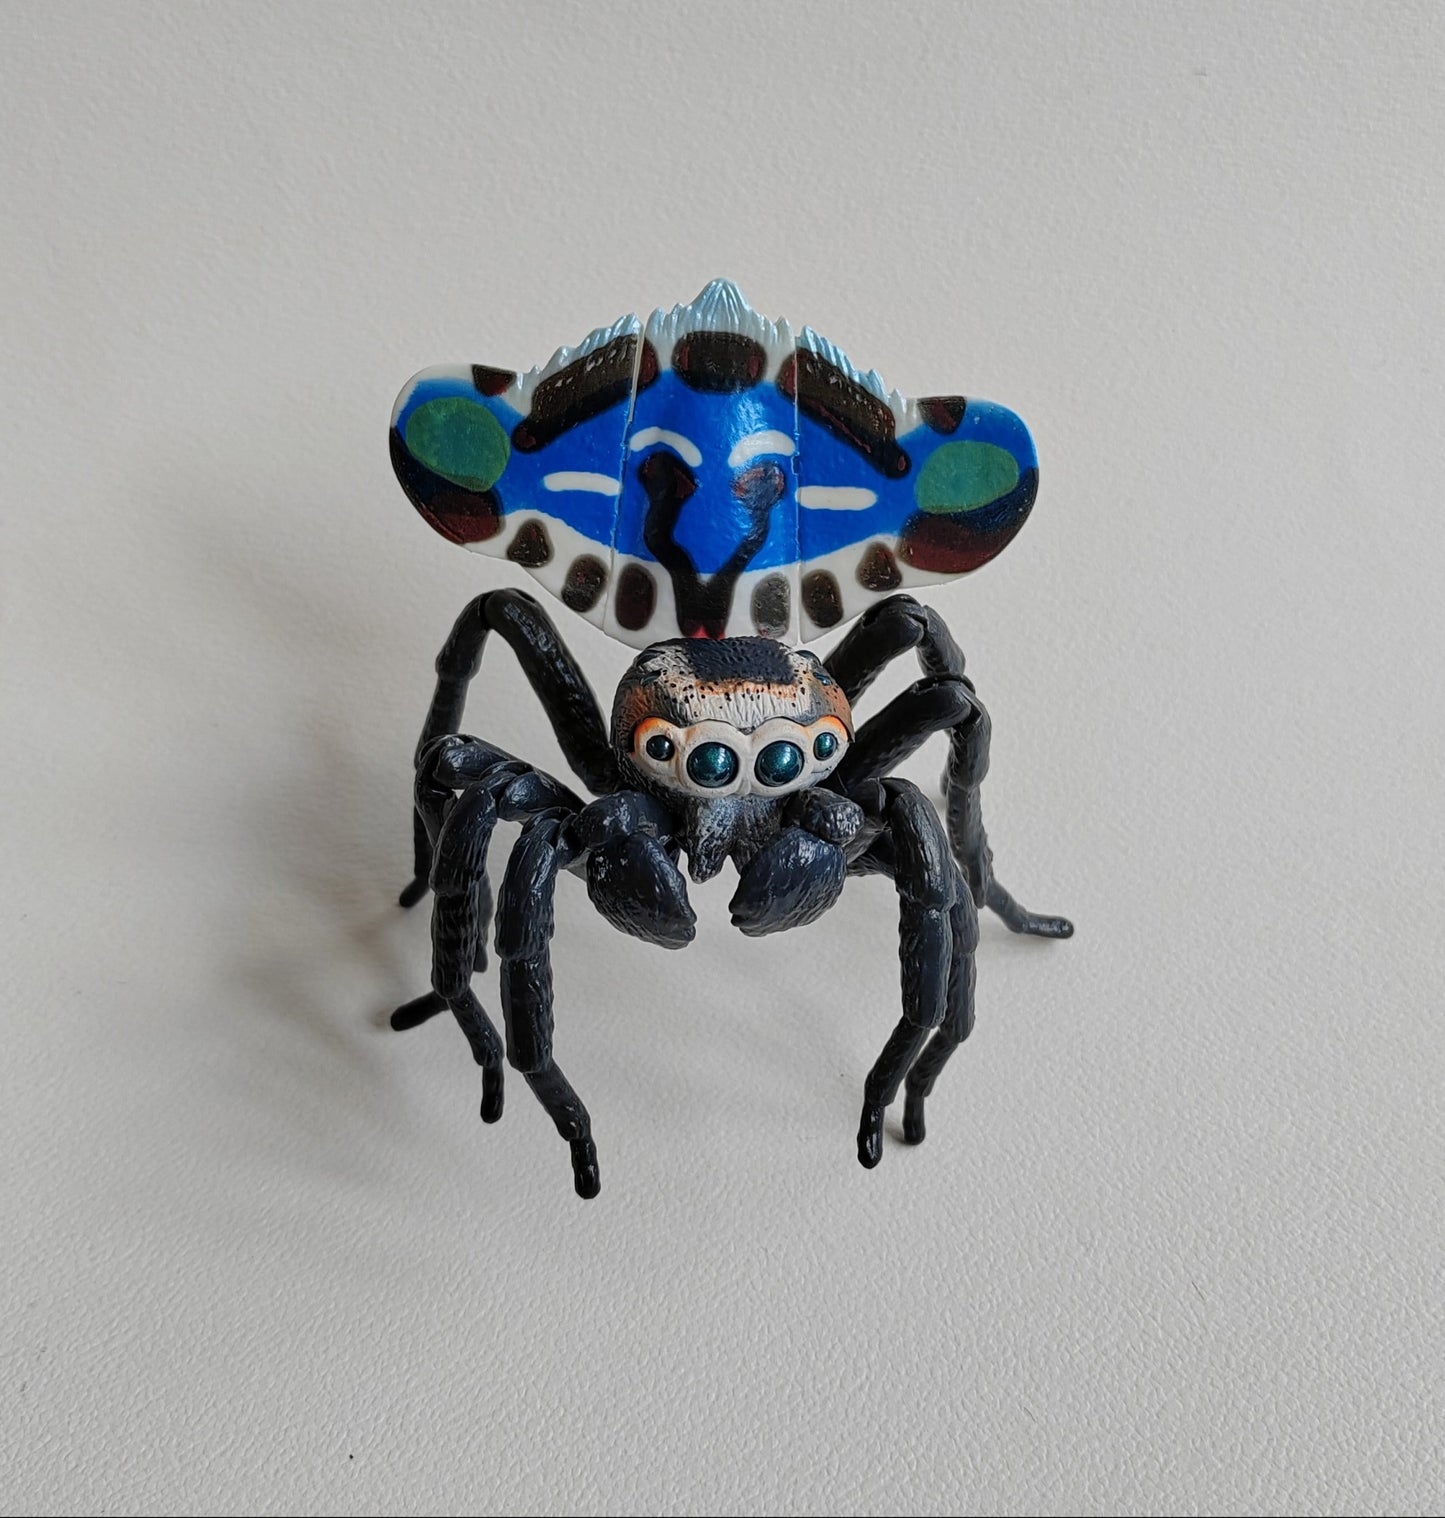 Peacock jumping spider figures, Japanese exclusives made by BANDAI